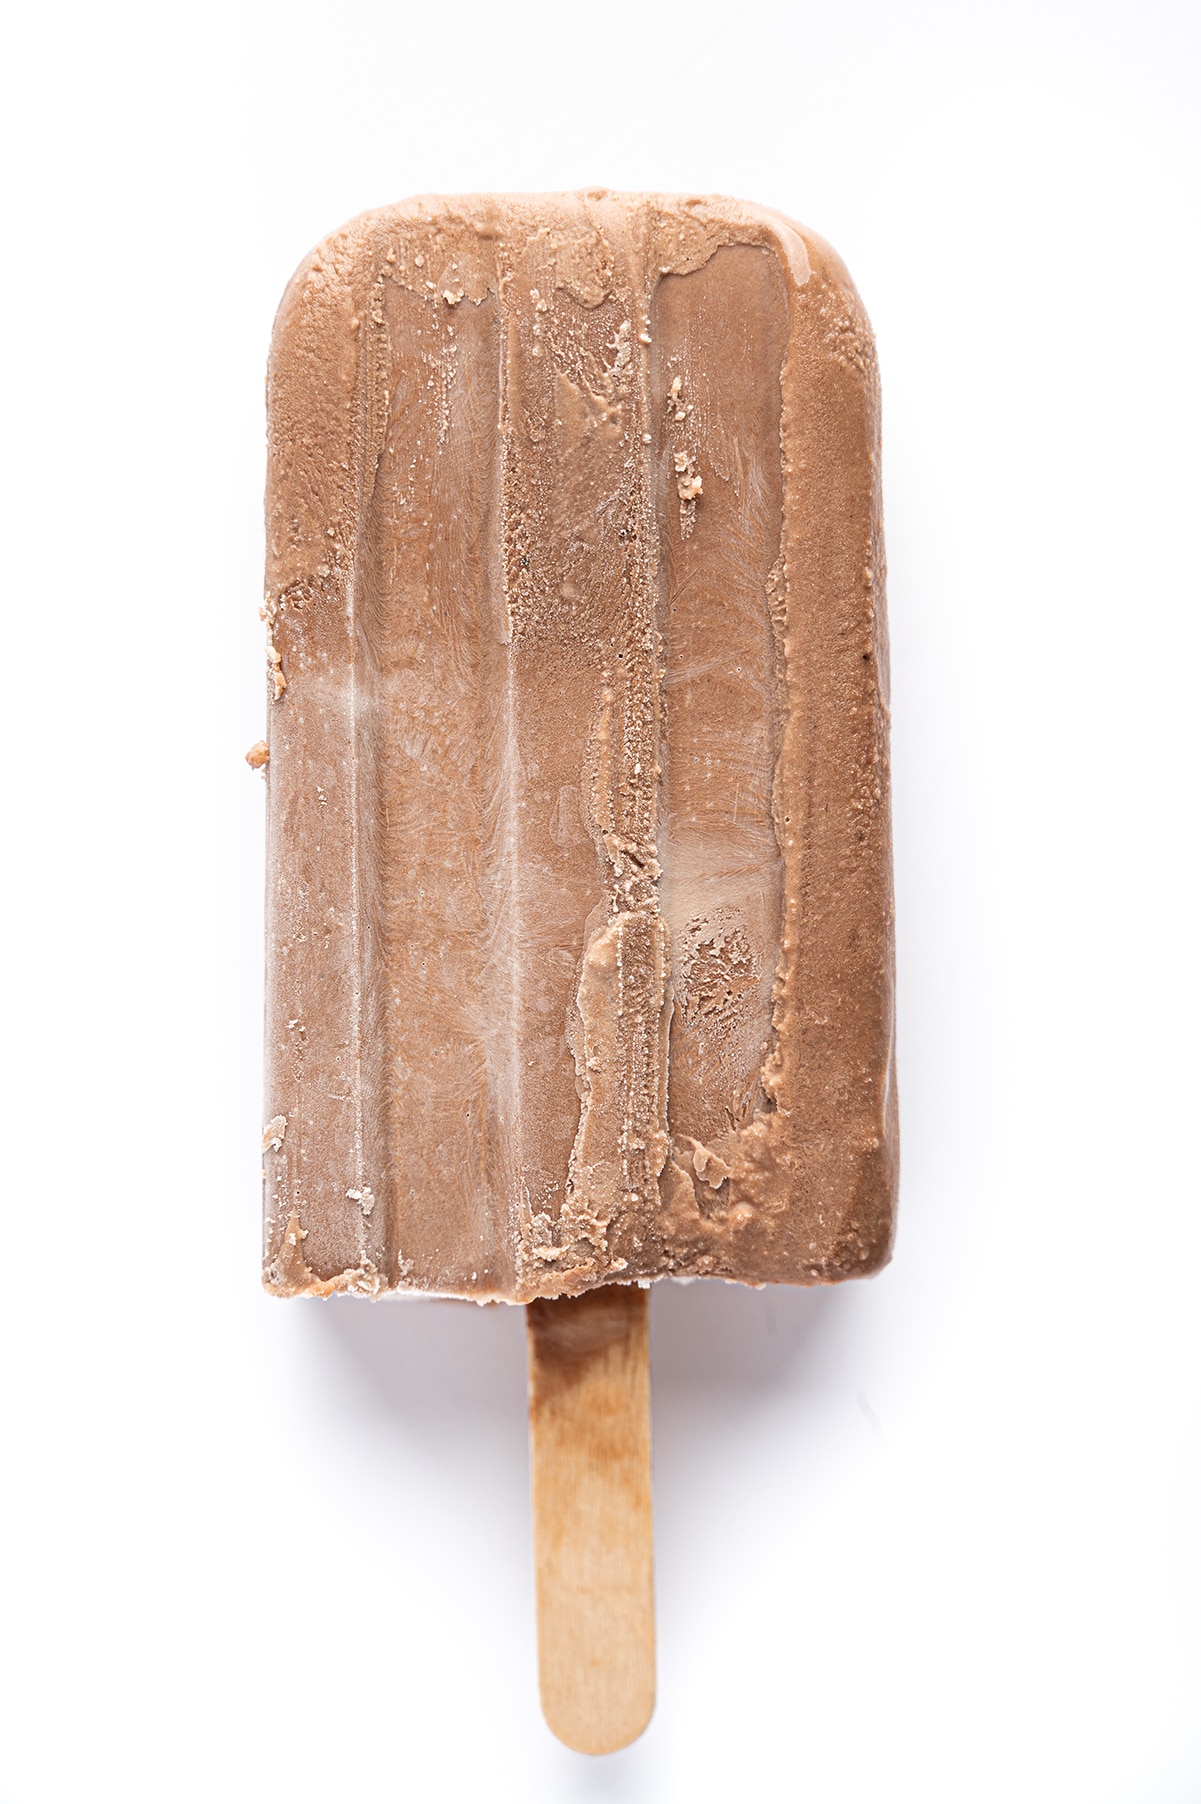 A single frozen sugar free fudgesicle with wooden stick against a bright white background